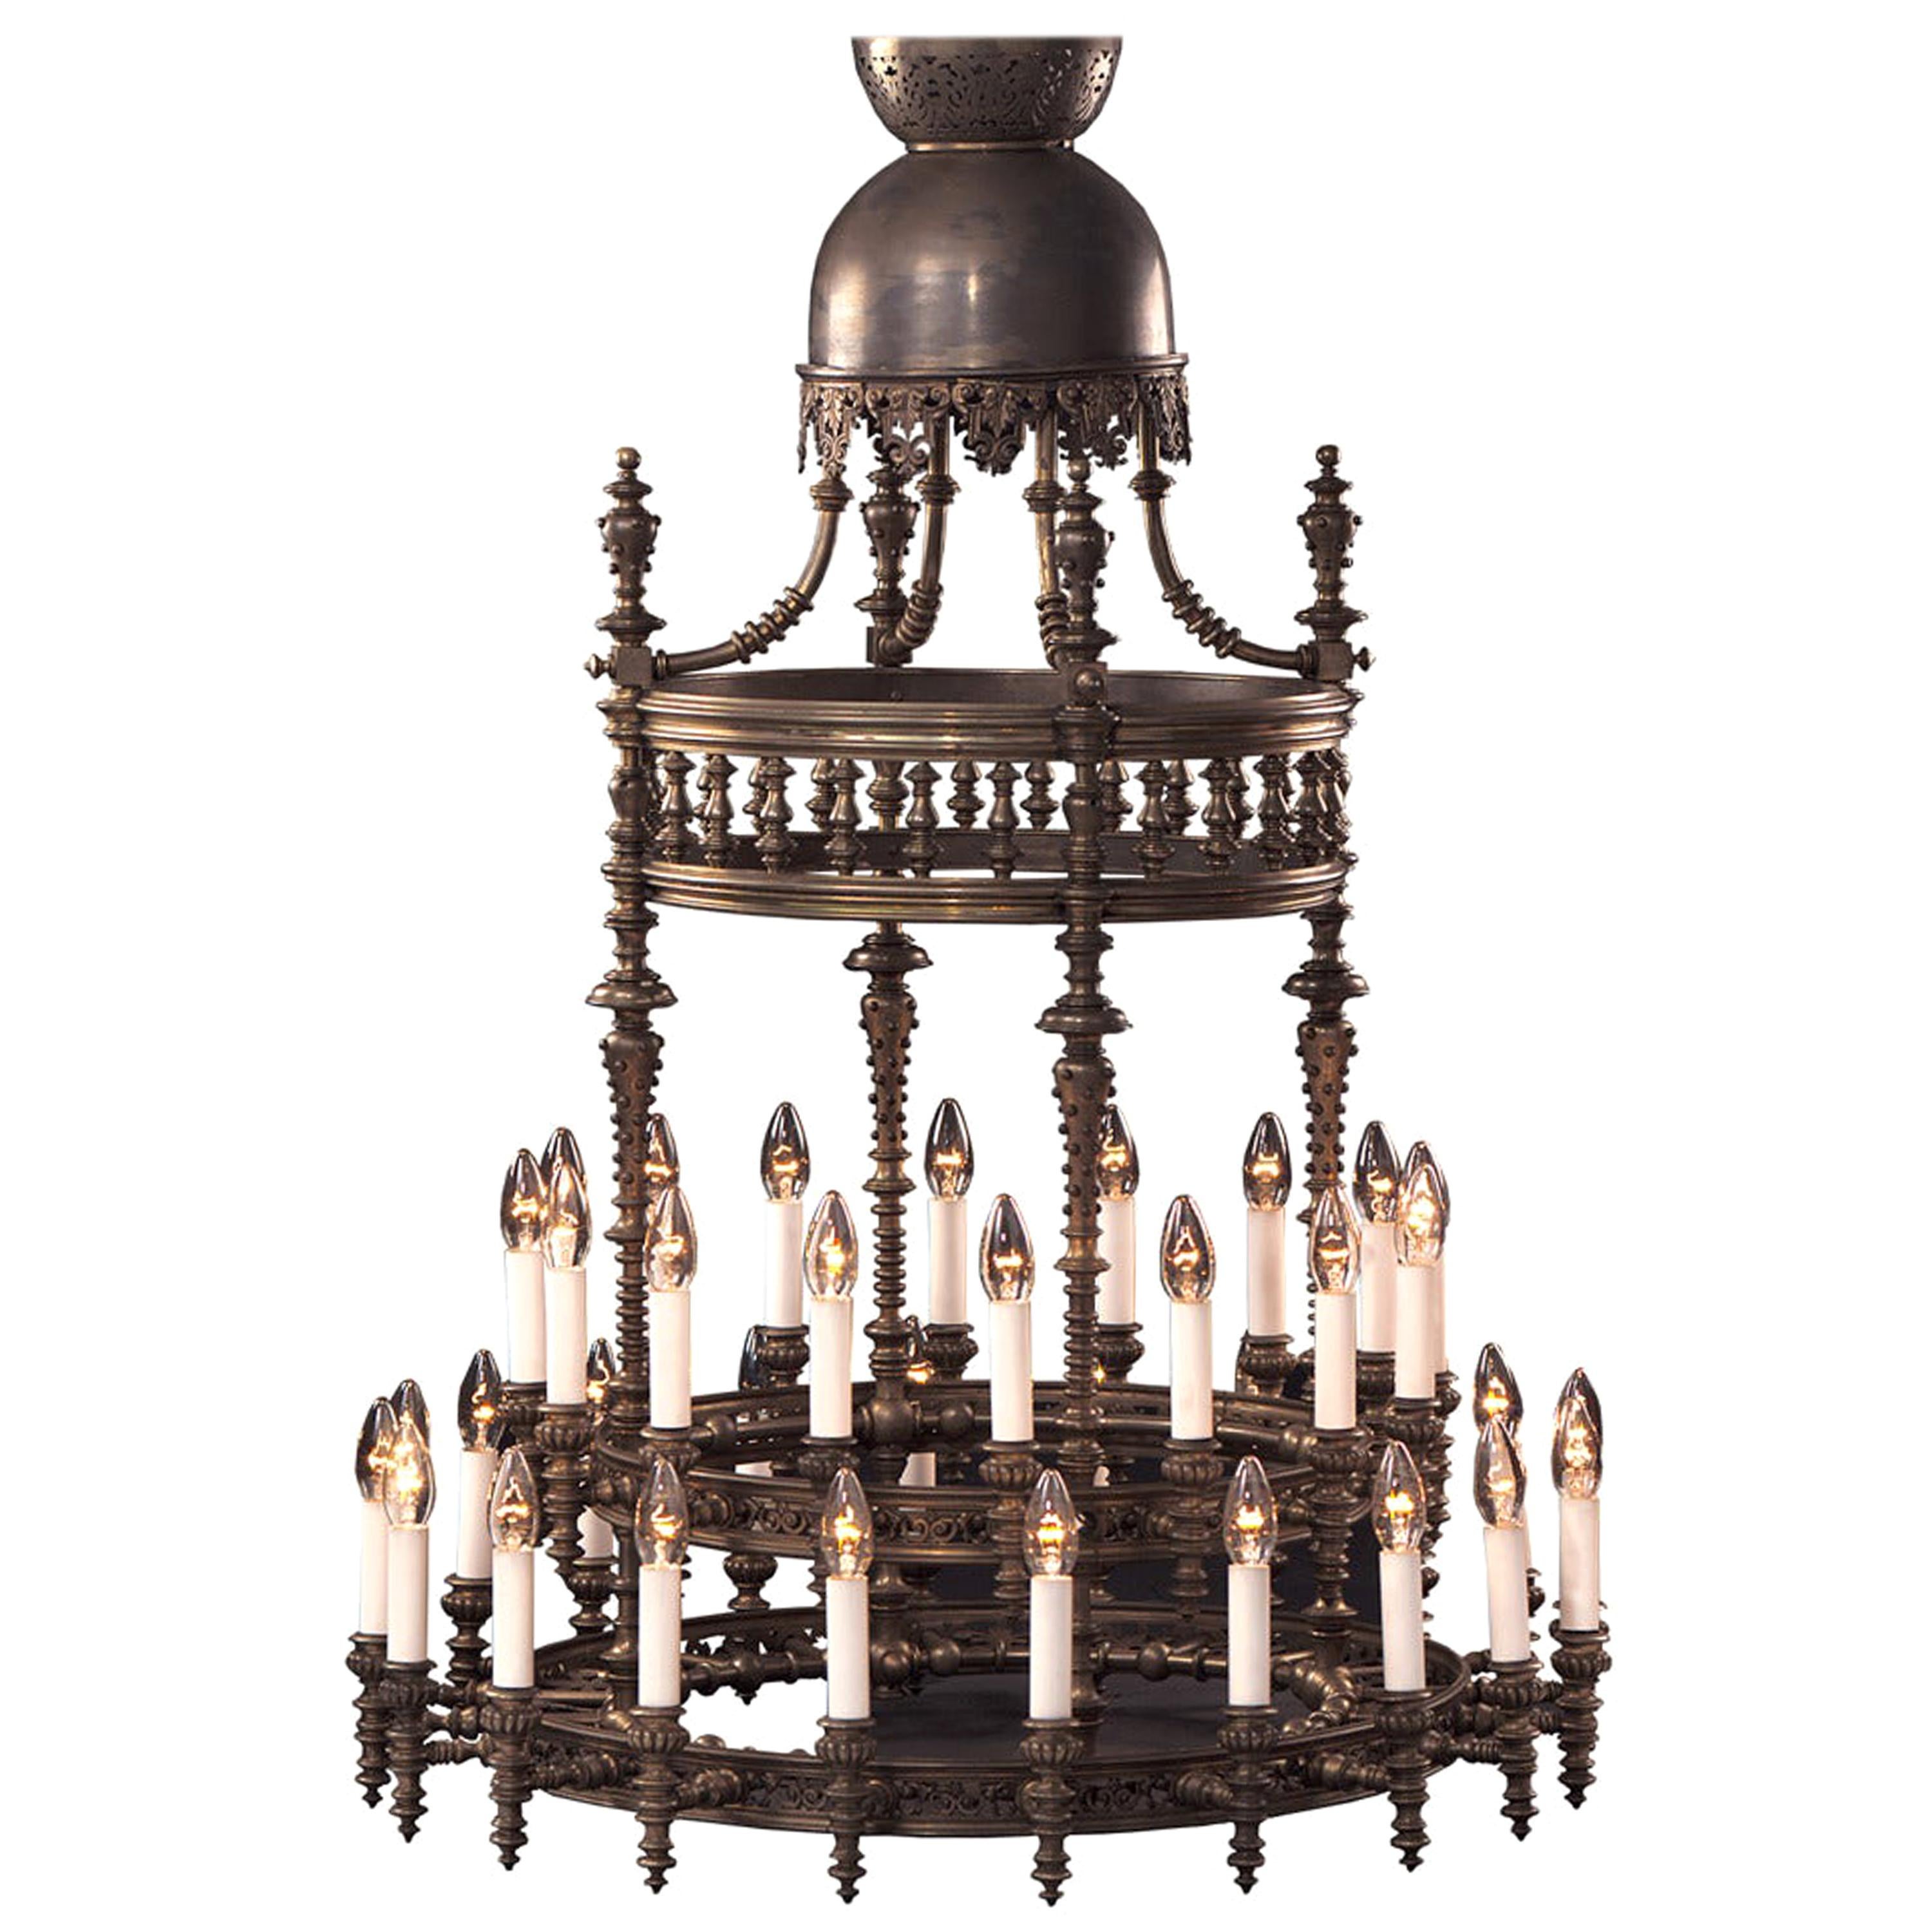 Original documented Otto Wagner´s Private belonging Dining Room Chandelier